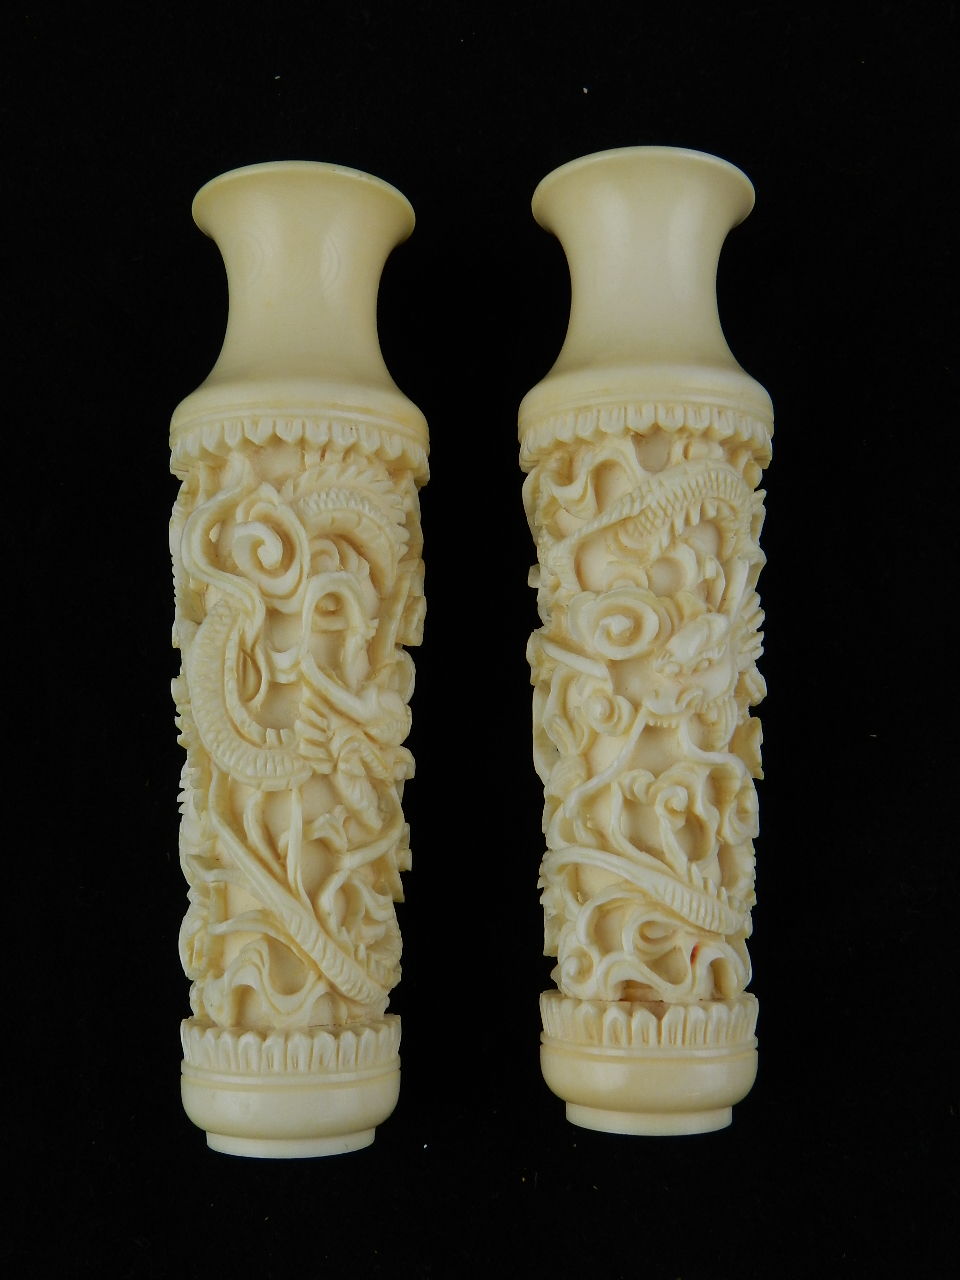 A pair of Chinese ivory vases deeply carved with entwined dragons